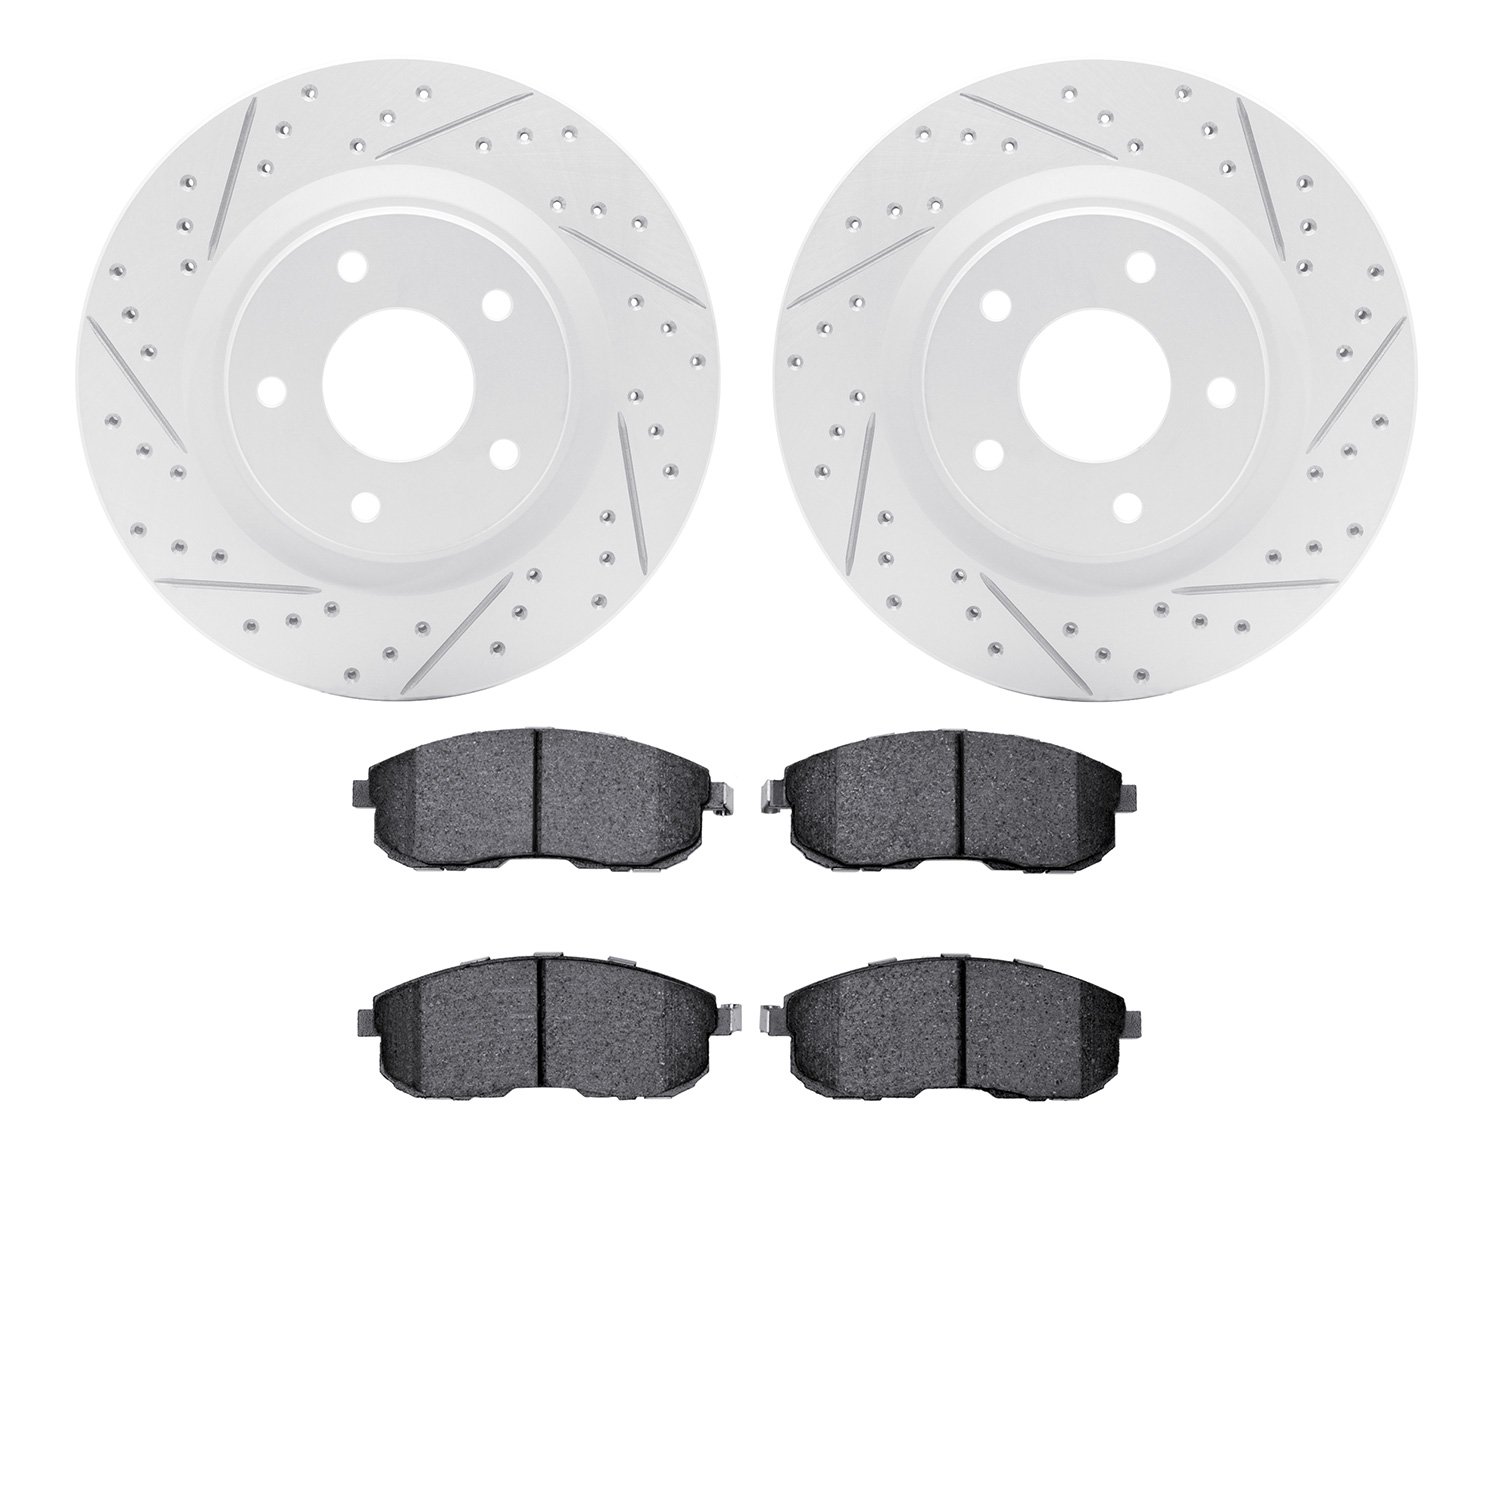 2502-67051 Geoperformance Drilled/Slotted Rotors w/5000 Advanced Brake Pads Kit, 2011-2019 Infiniti/Nissan, Position: Front